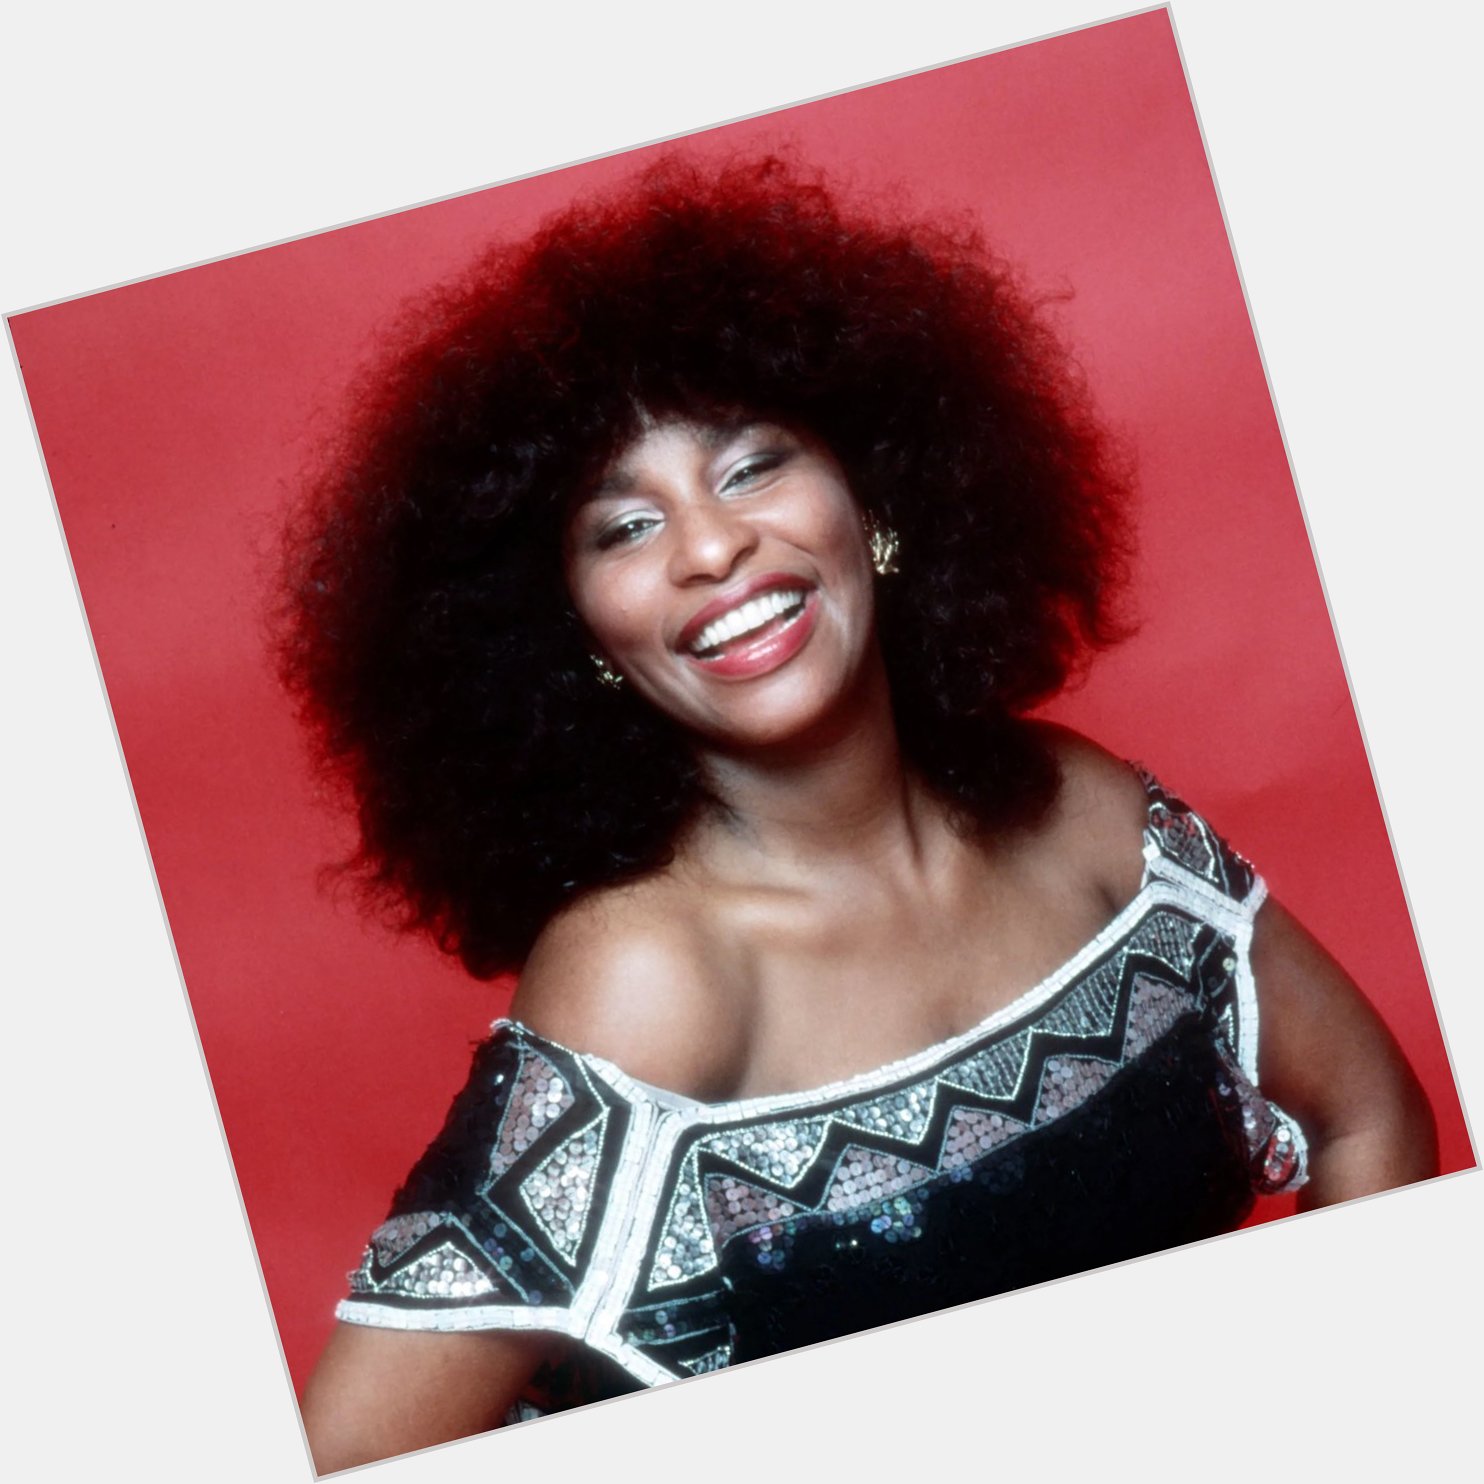 Happy Birthday to the 10 time GRAMMY Award winner & the Queen of Funk herself, Chaka Khan 